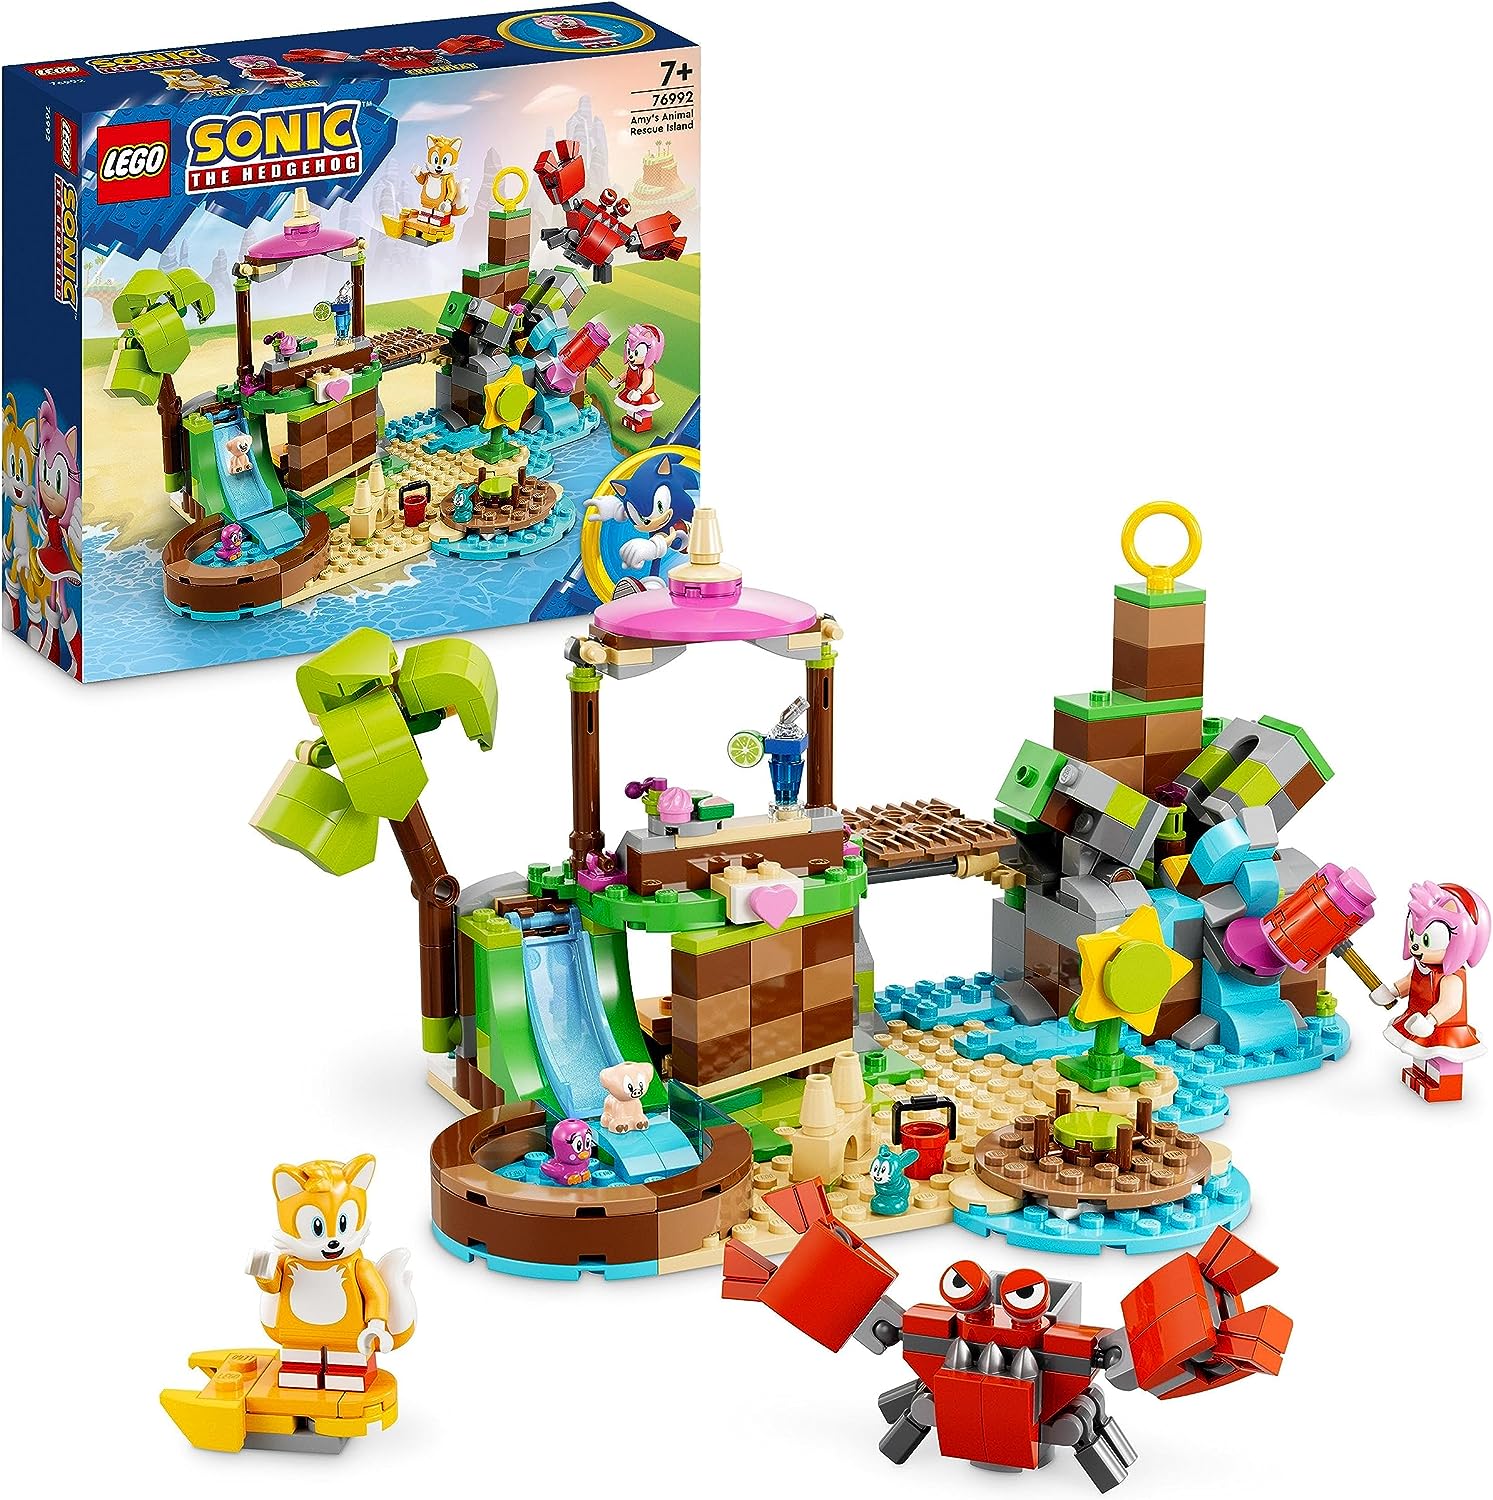 LEGO 76992 Sonic The Hedgehog Amys Animal Rescue Island Toy Set, Buildable Game with 6 Characters Including Amy & Tails Figures, Gifts for Kids, Boys and Girls from 7 Years